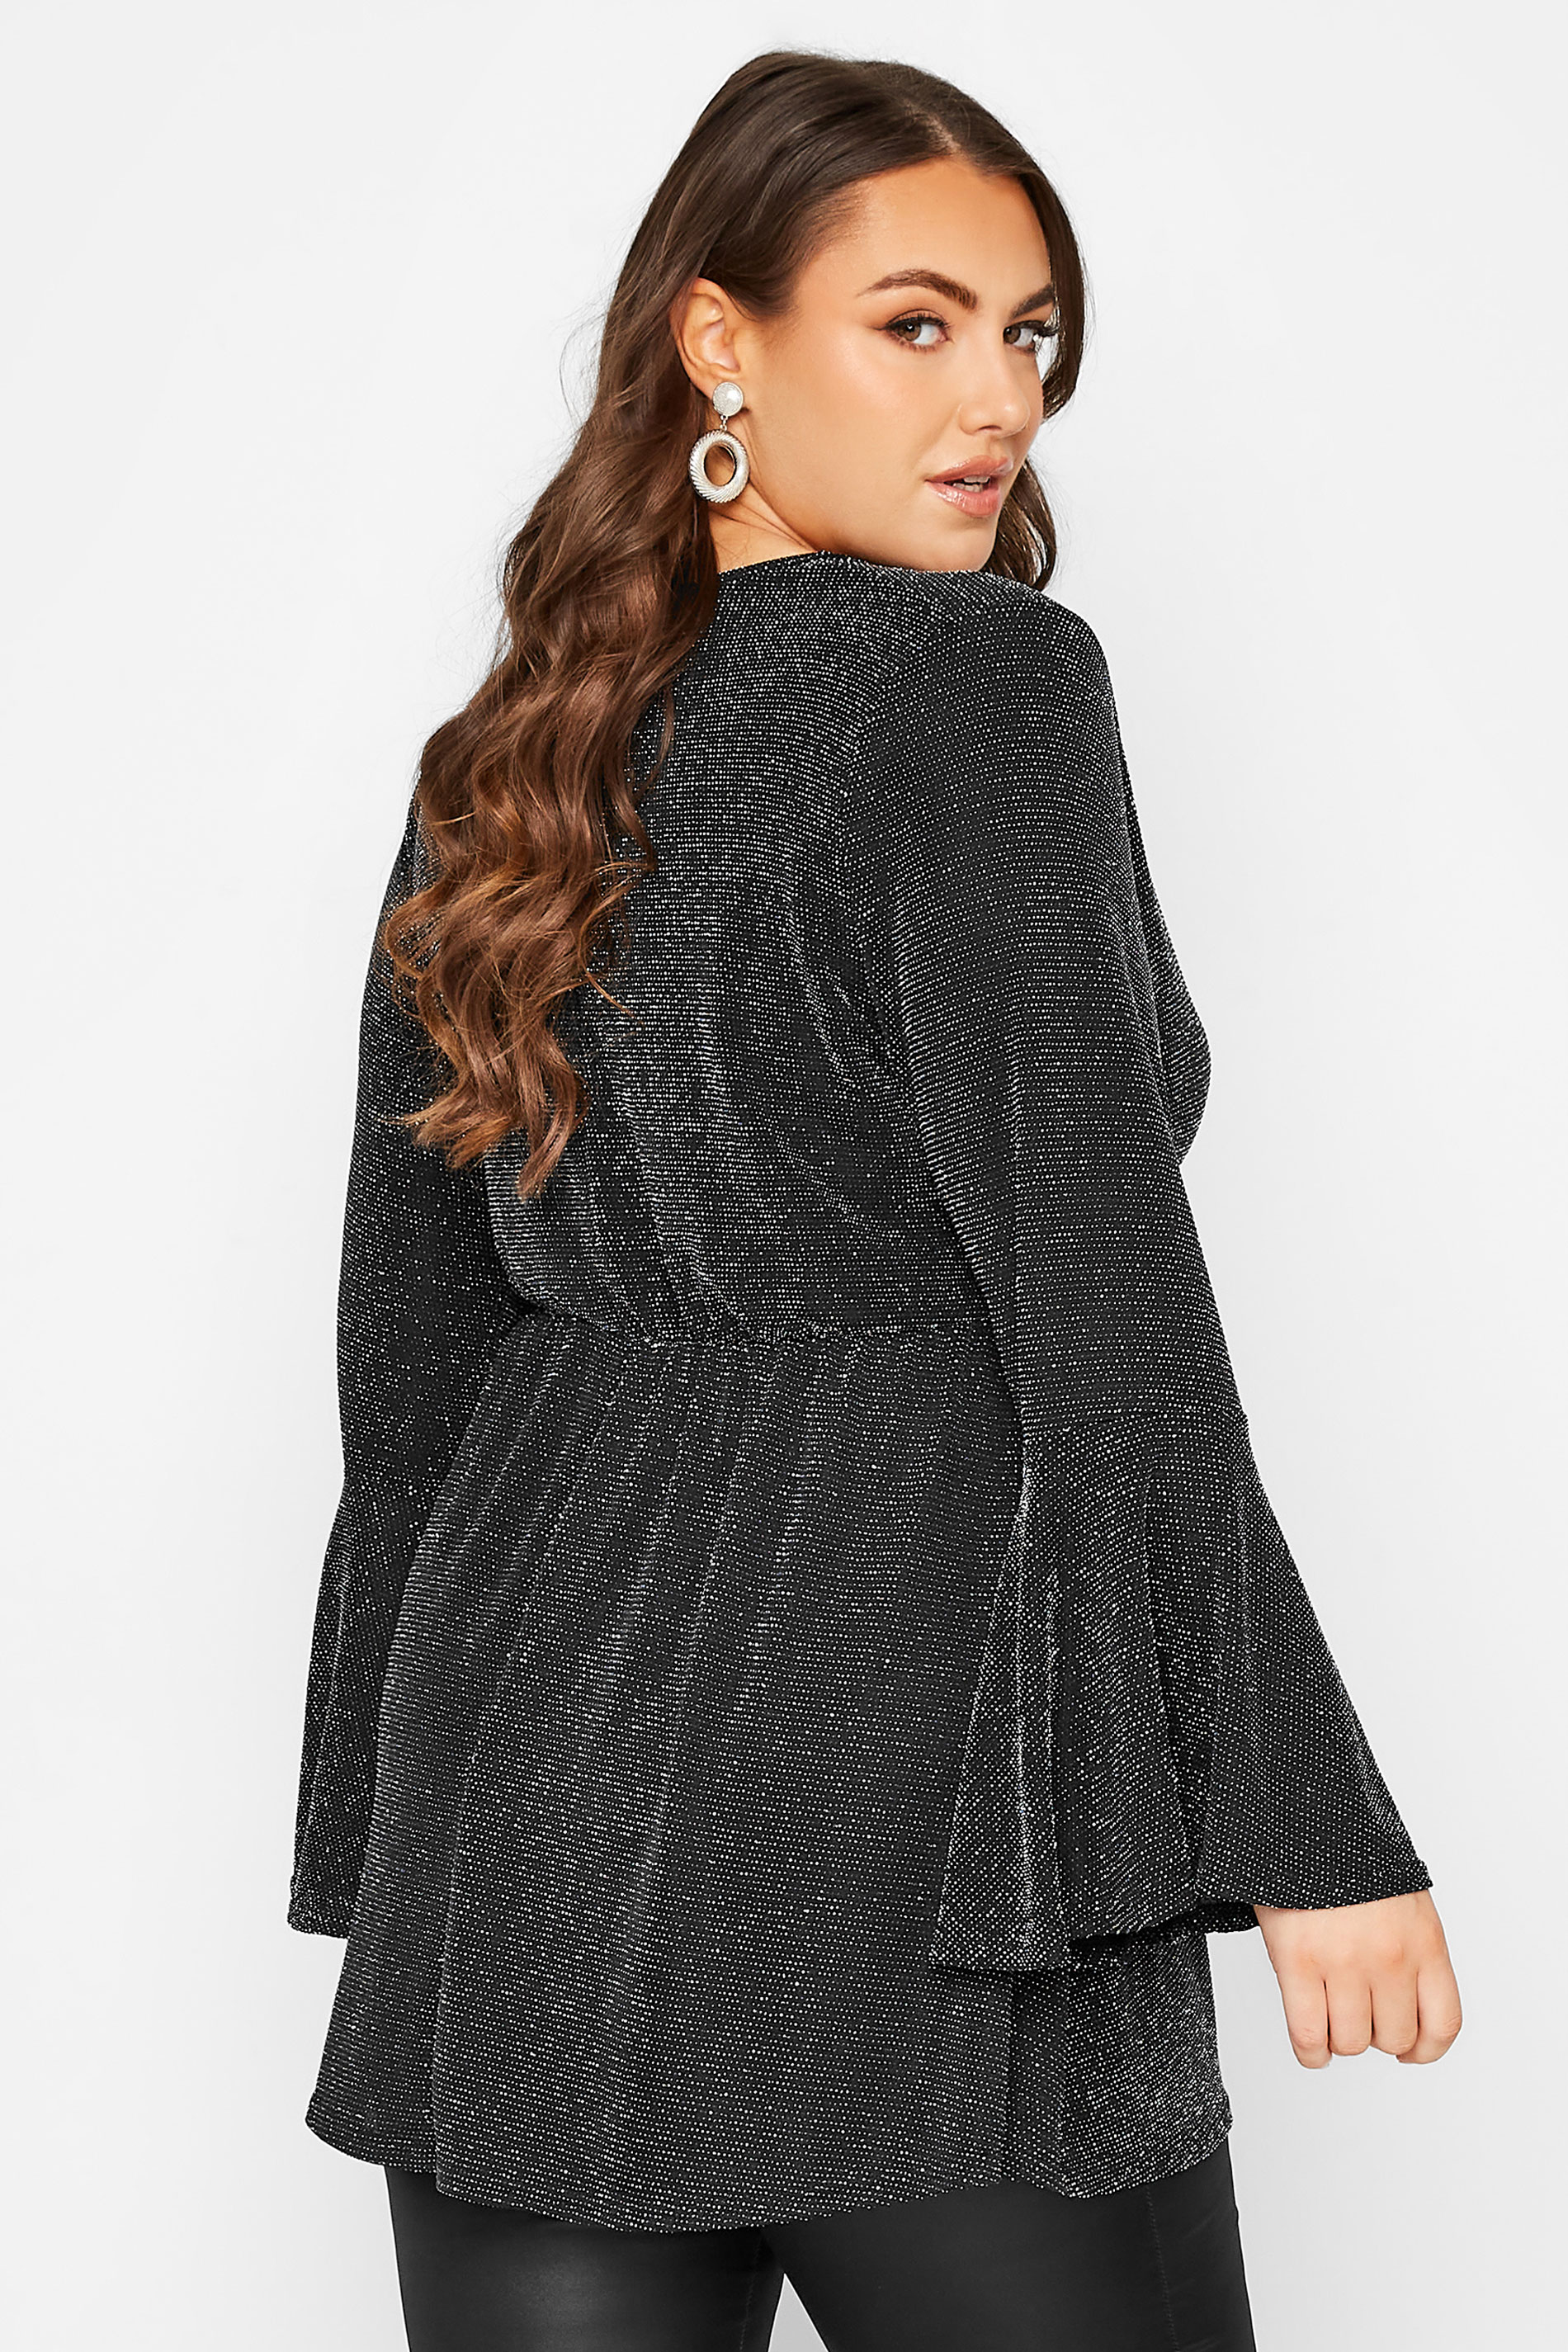 LIMITED COLLECTION Plus Size Black Glitter Flared Sleeve Top | Yours Clothing 3